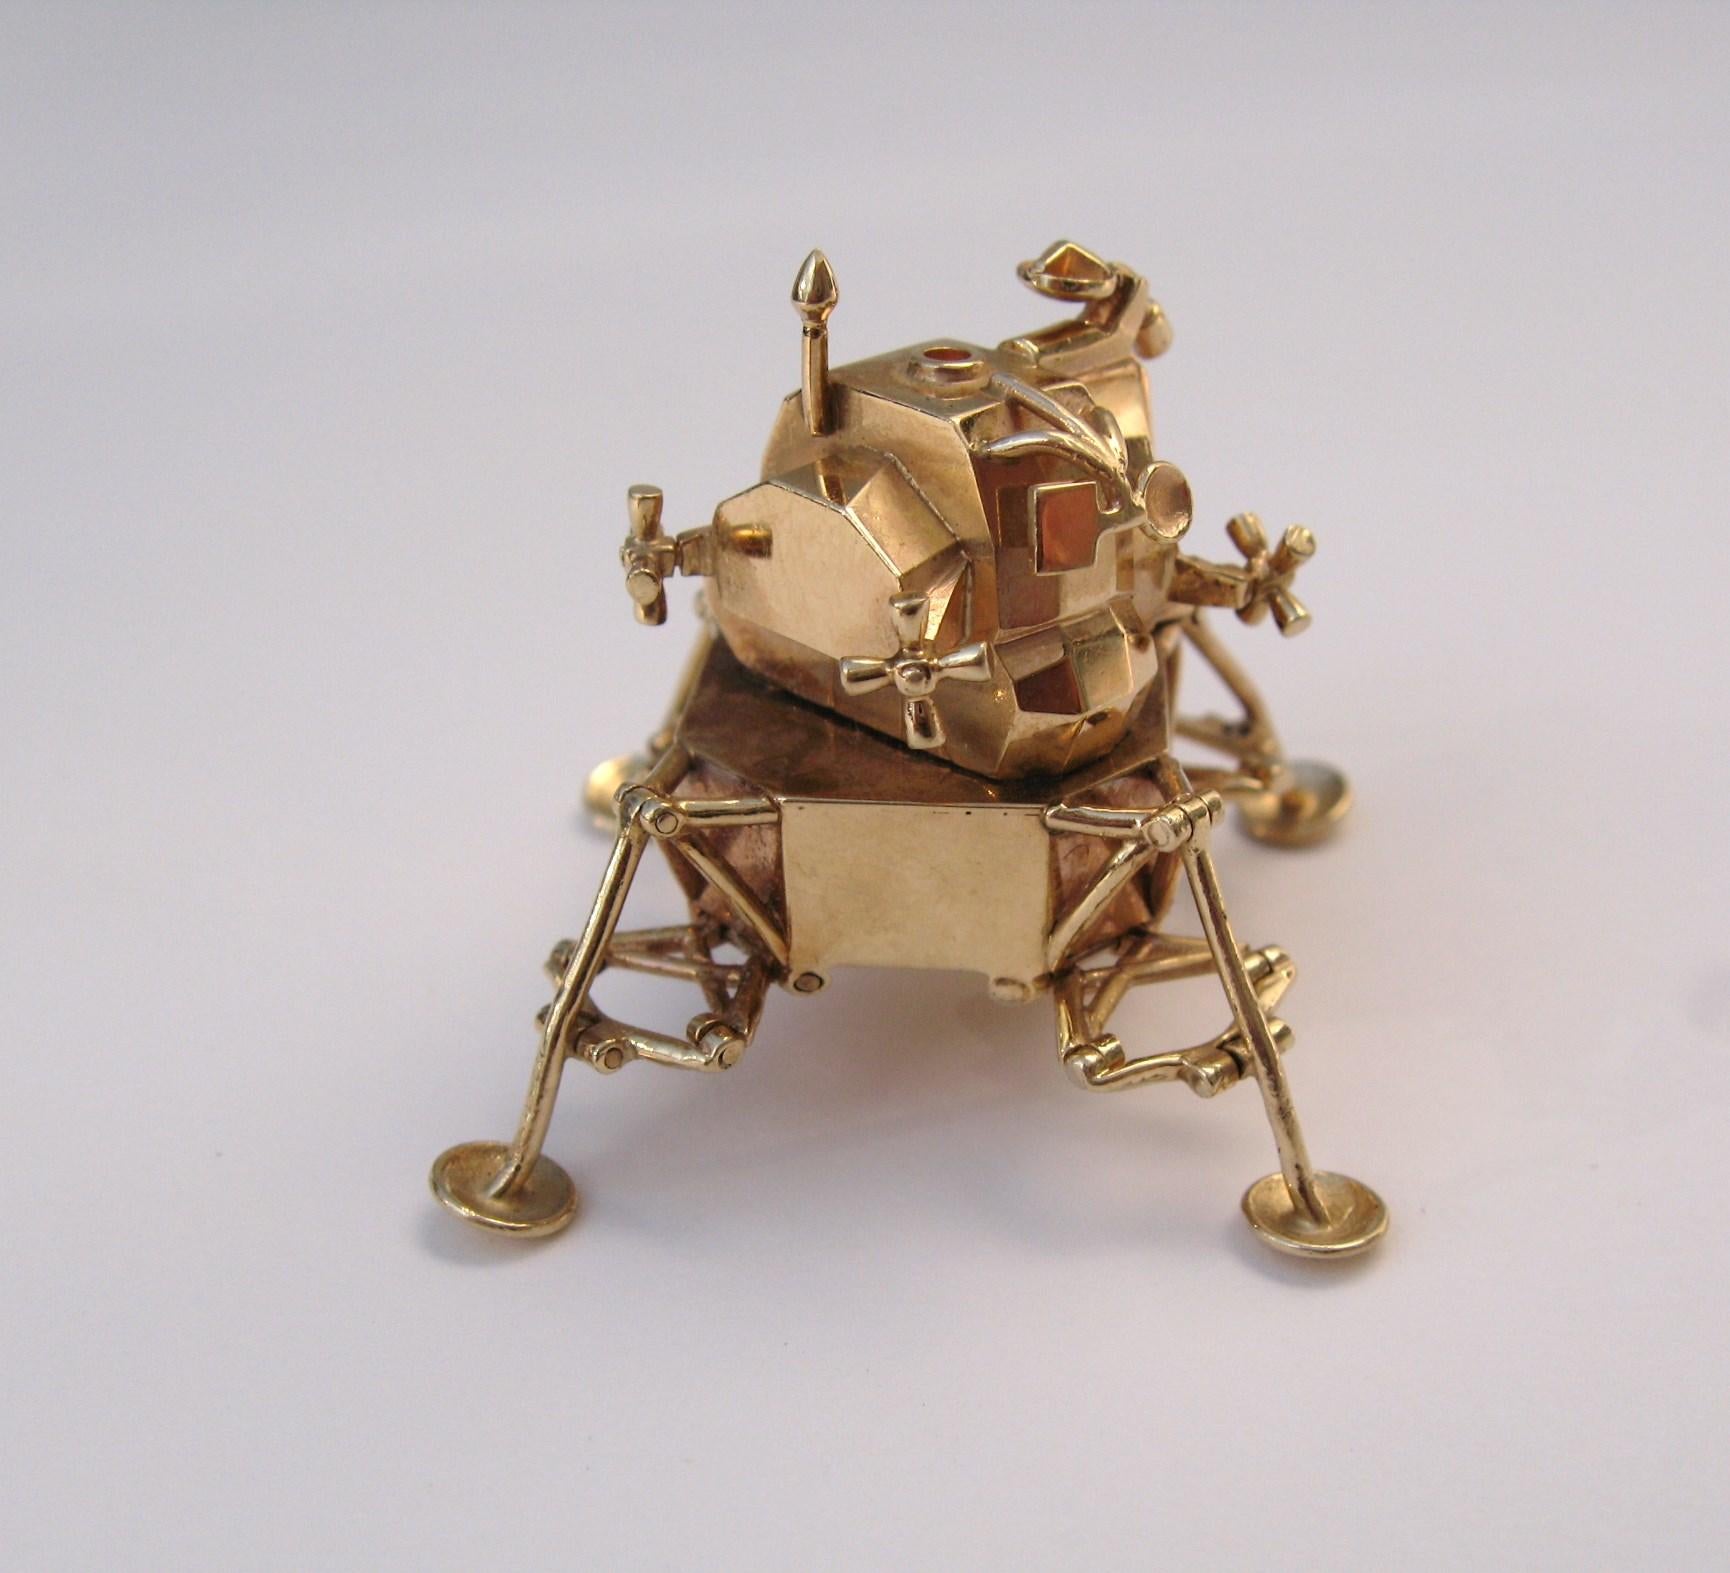 why was the lunar lander covered in gold